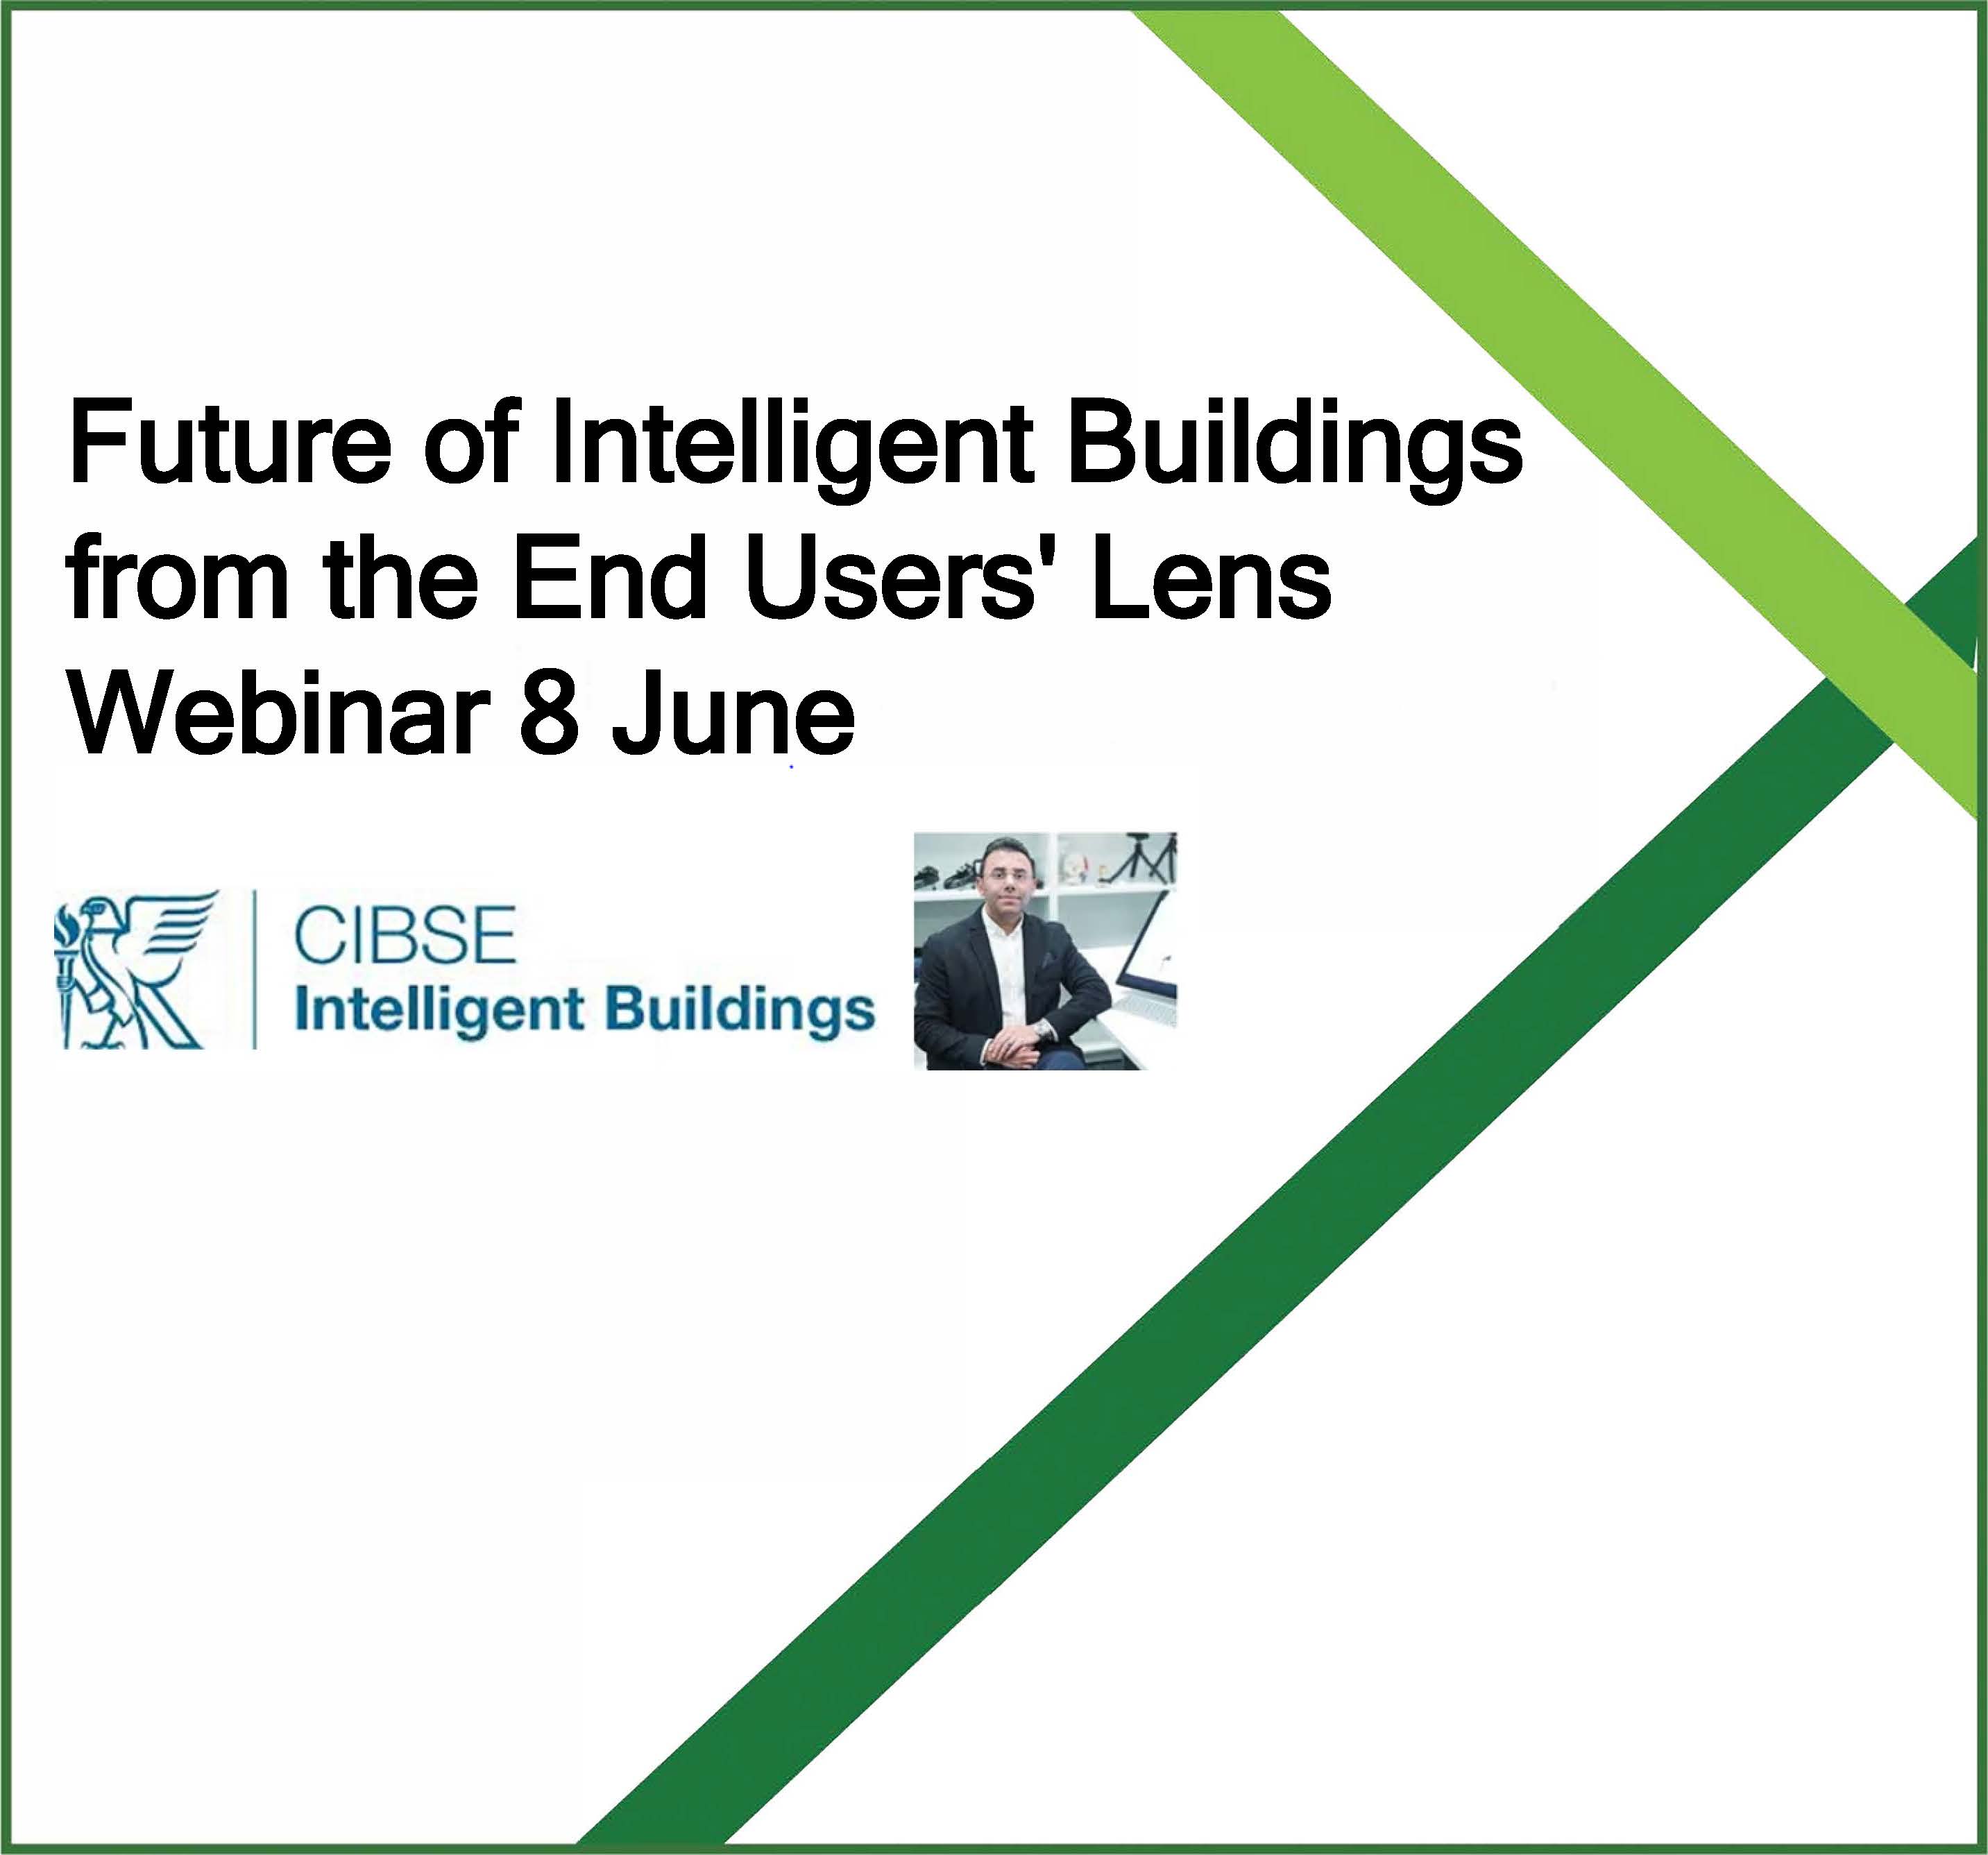 Future of Intelligent Buildings from the End Users’ Lens